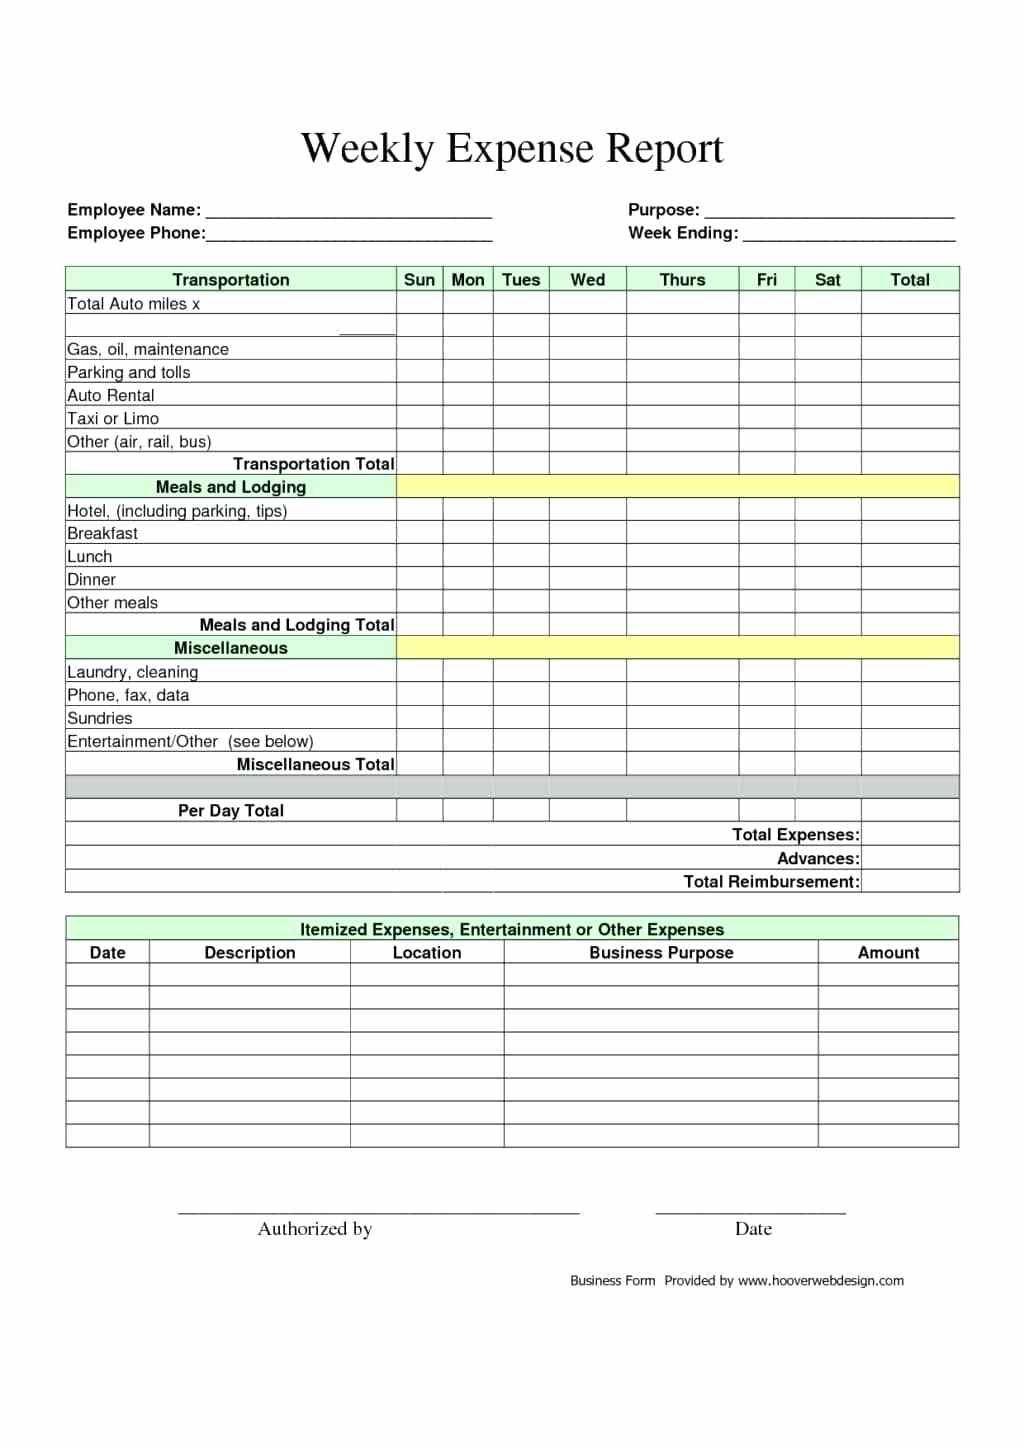 Template Event Expense Report Mileage Free And Form Excel Pertaining To Gas Mileage Expense Report Template